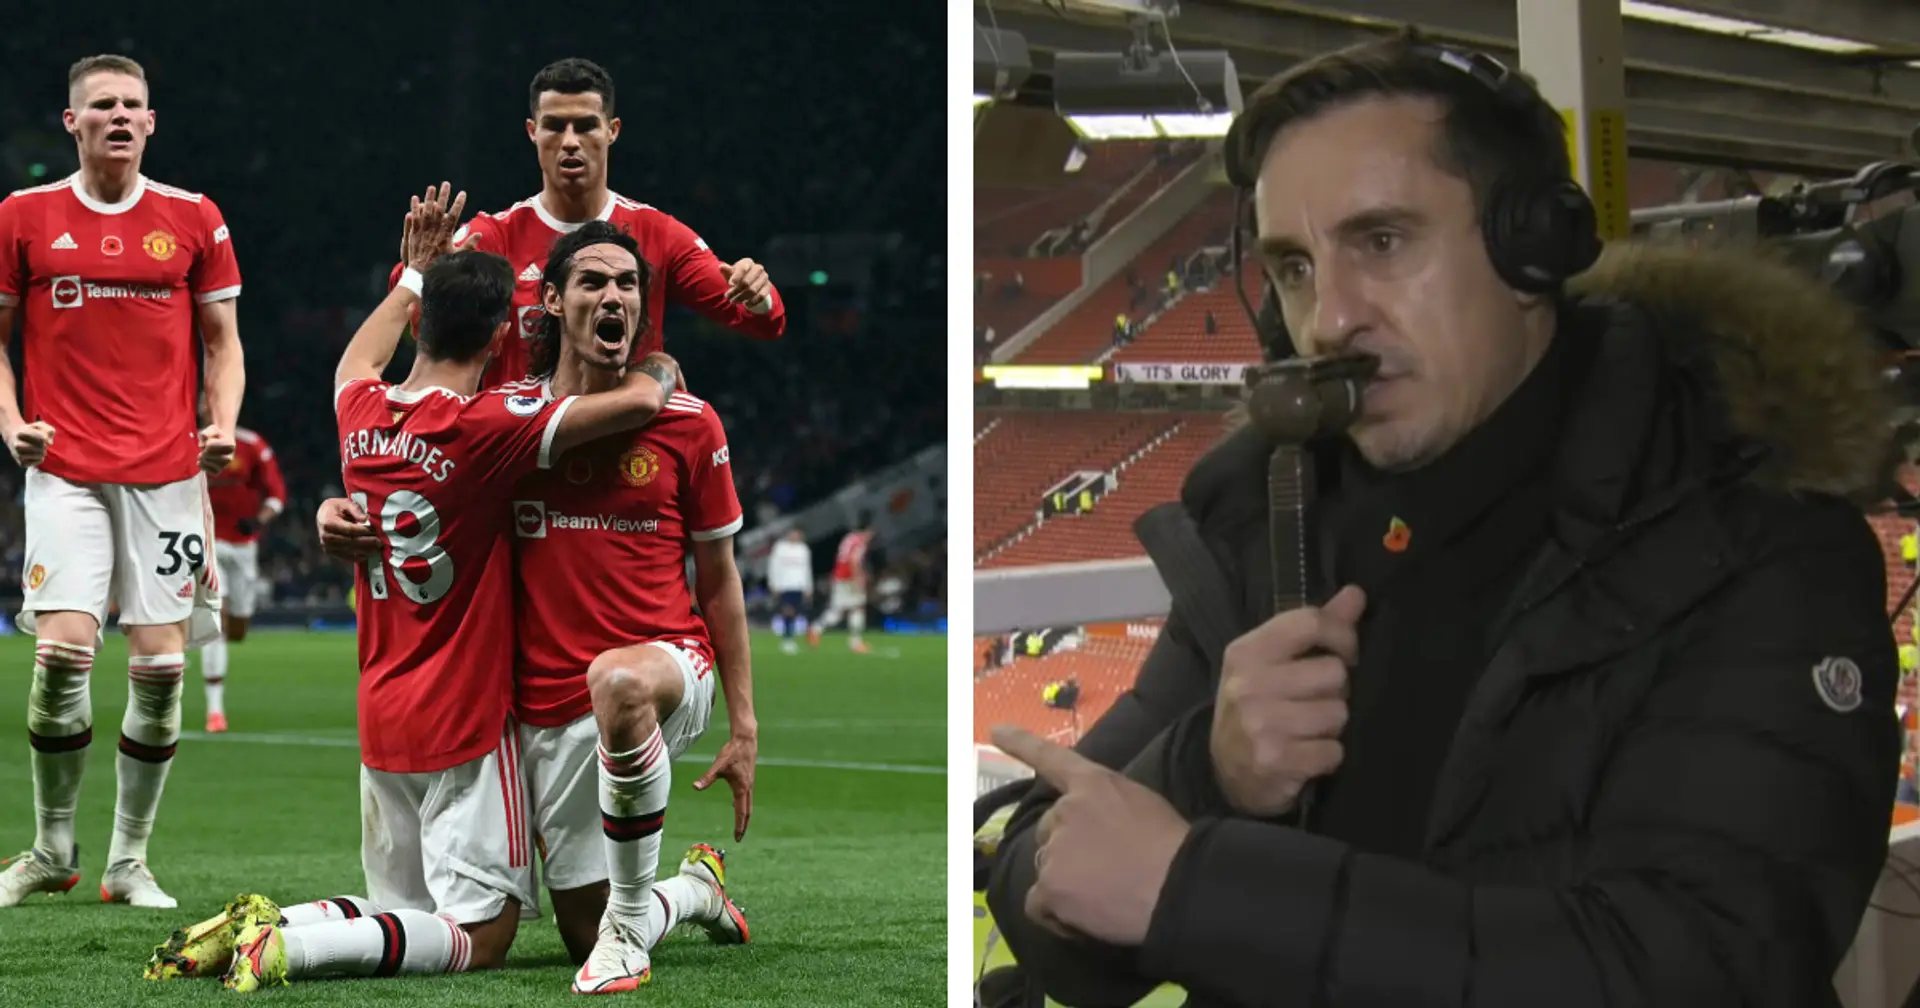 'When he doesn't play they seem nice': Gary Neville believes Man United missed Cavani in Man City defeat